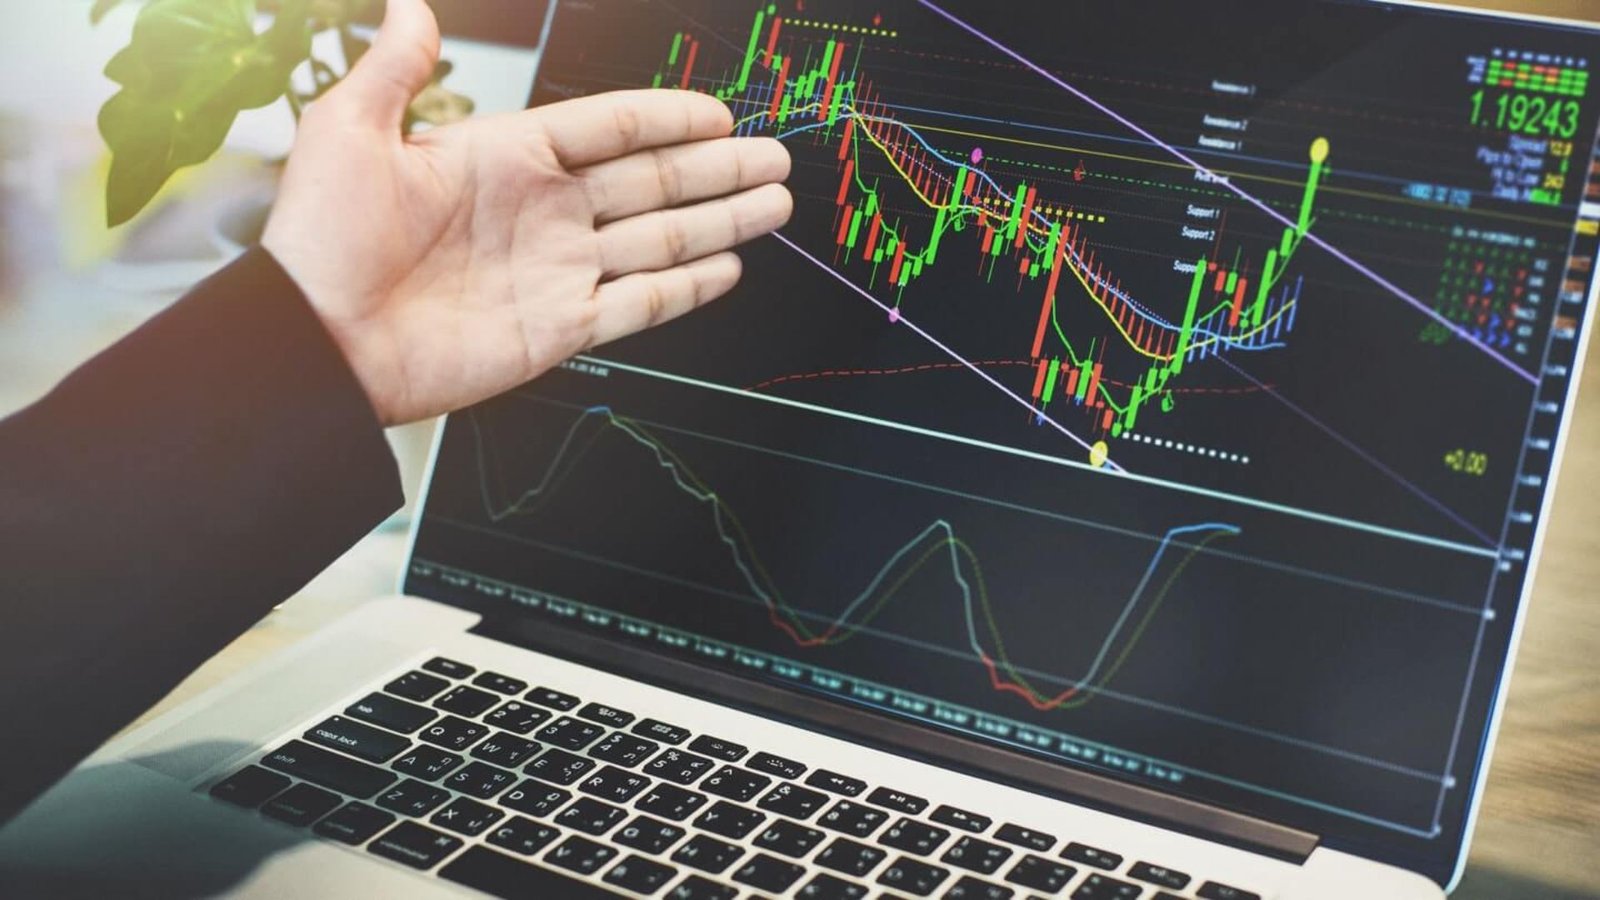 a man's hand pointing at a laptop showing a forex market graph